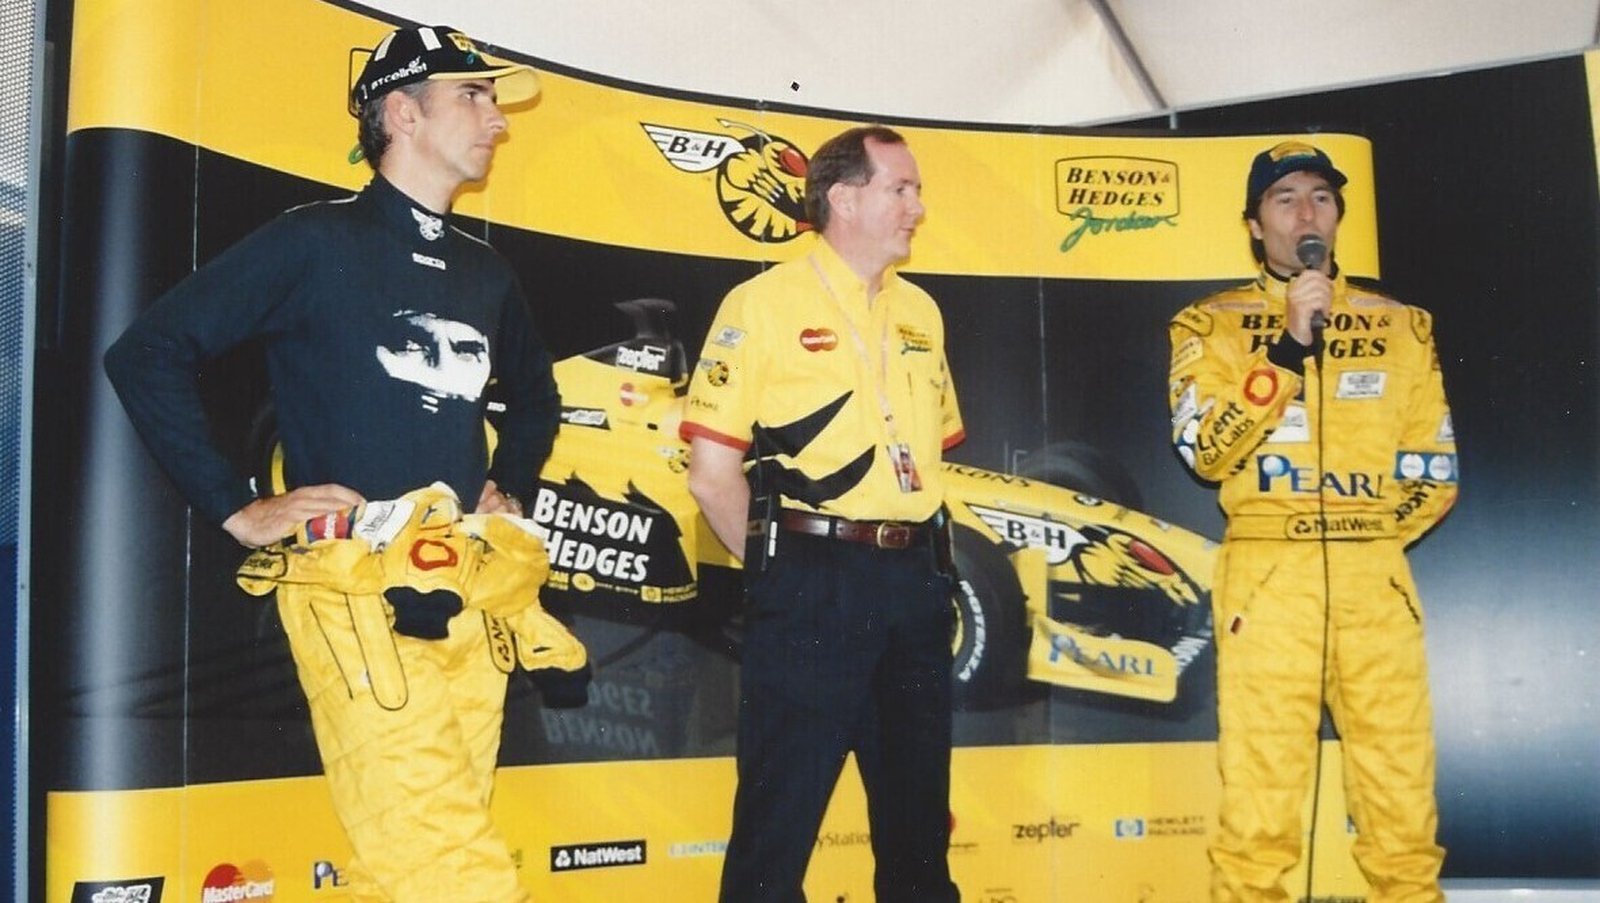 Image - Mark Gallagher, centre, with Damon Hill and Heinz-Harald Frentzen